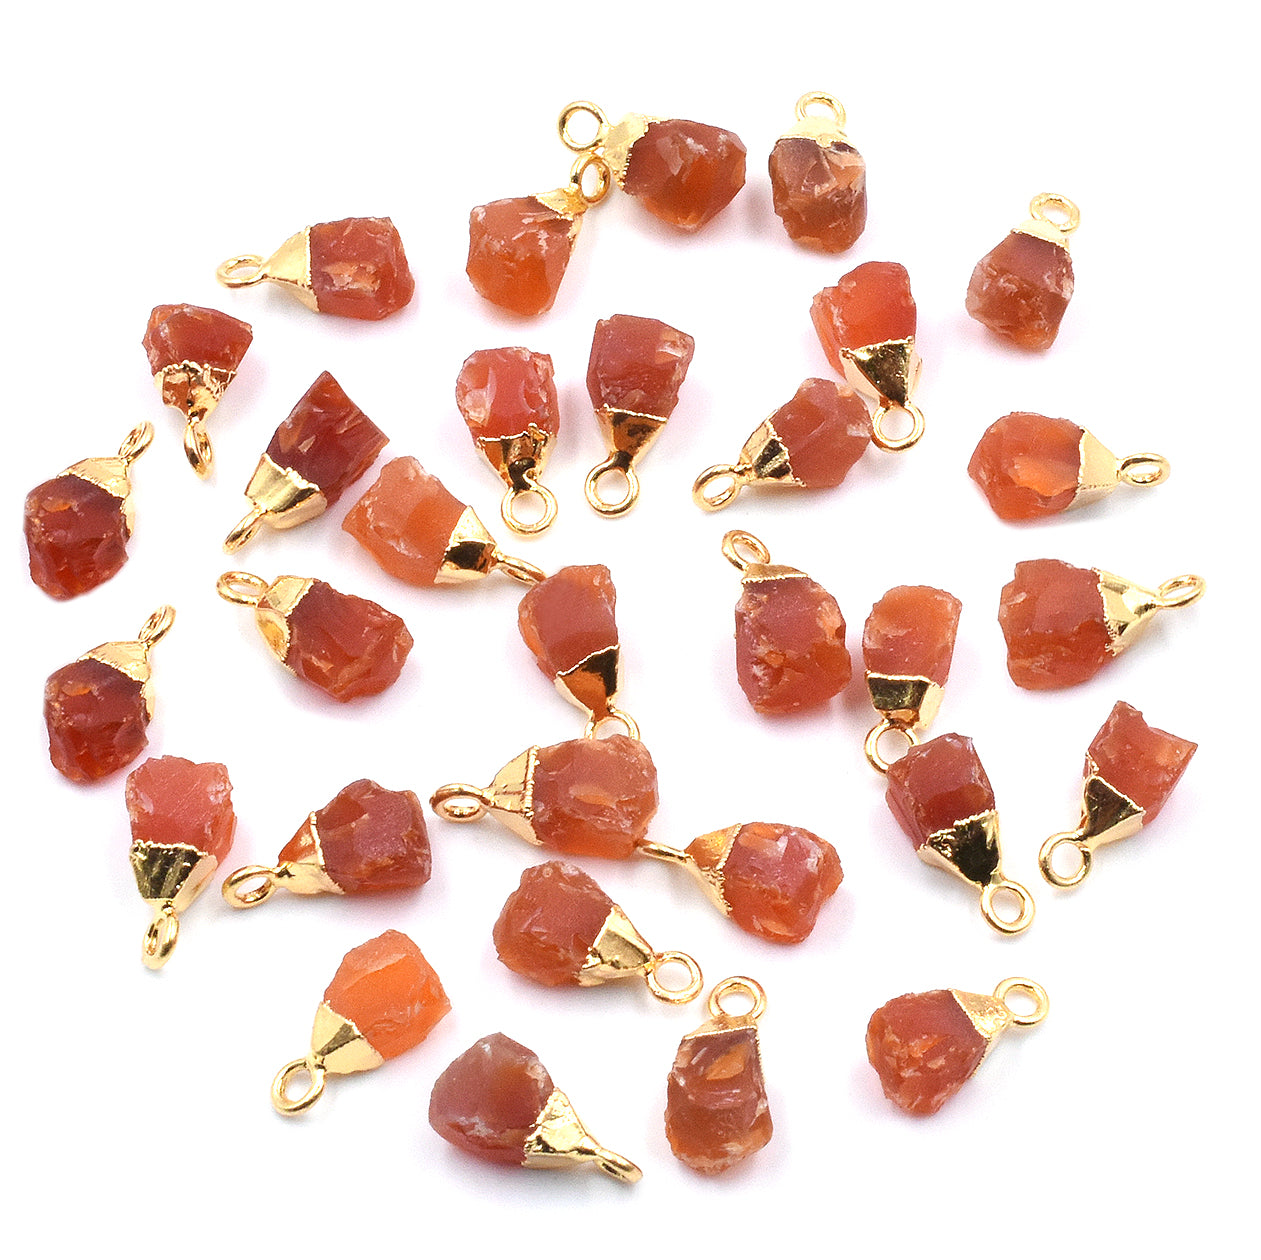 Red Agate 8X5 To 9X6 MM Rough Shape Gold Electroplated Pendant (Set Of 2 Pcs)